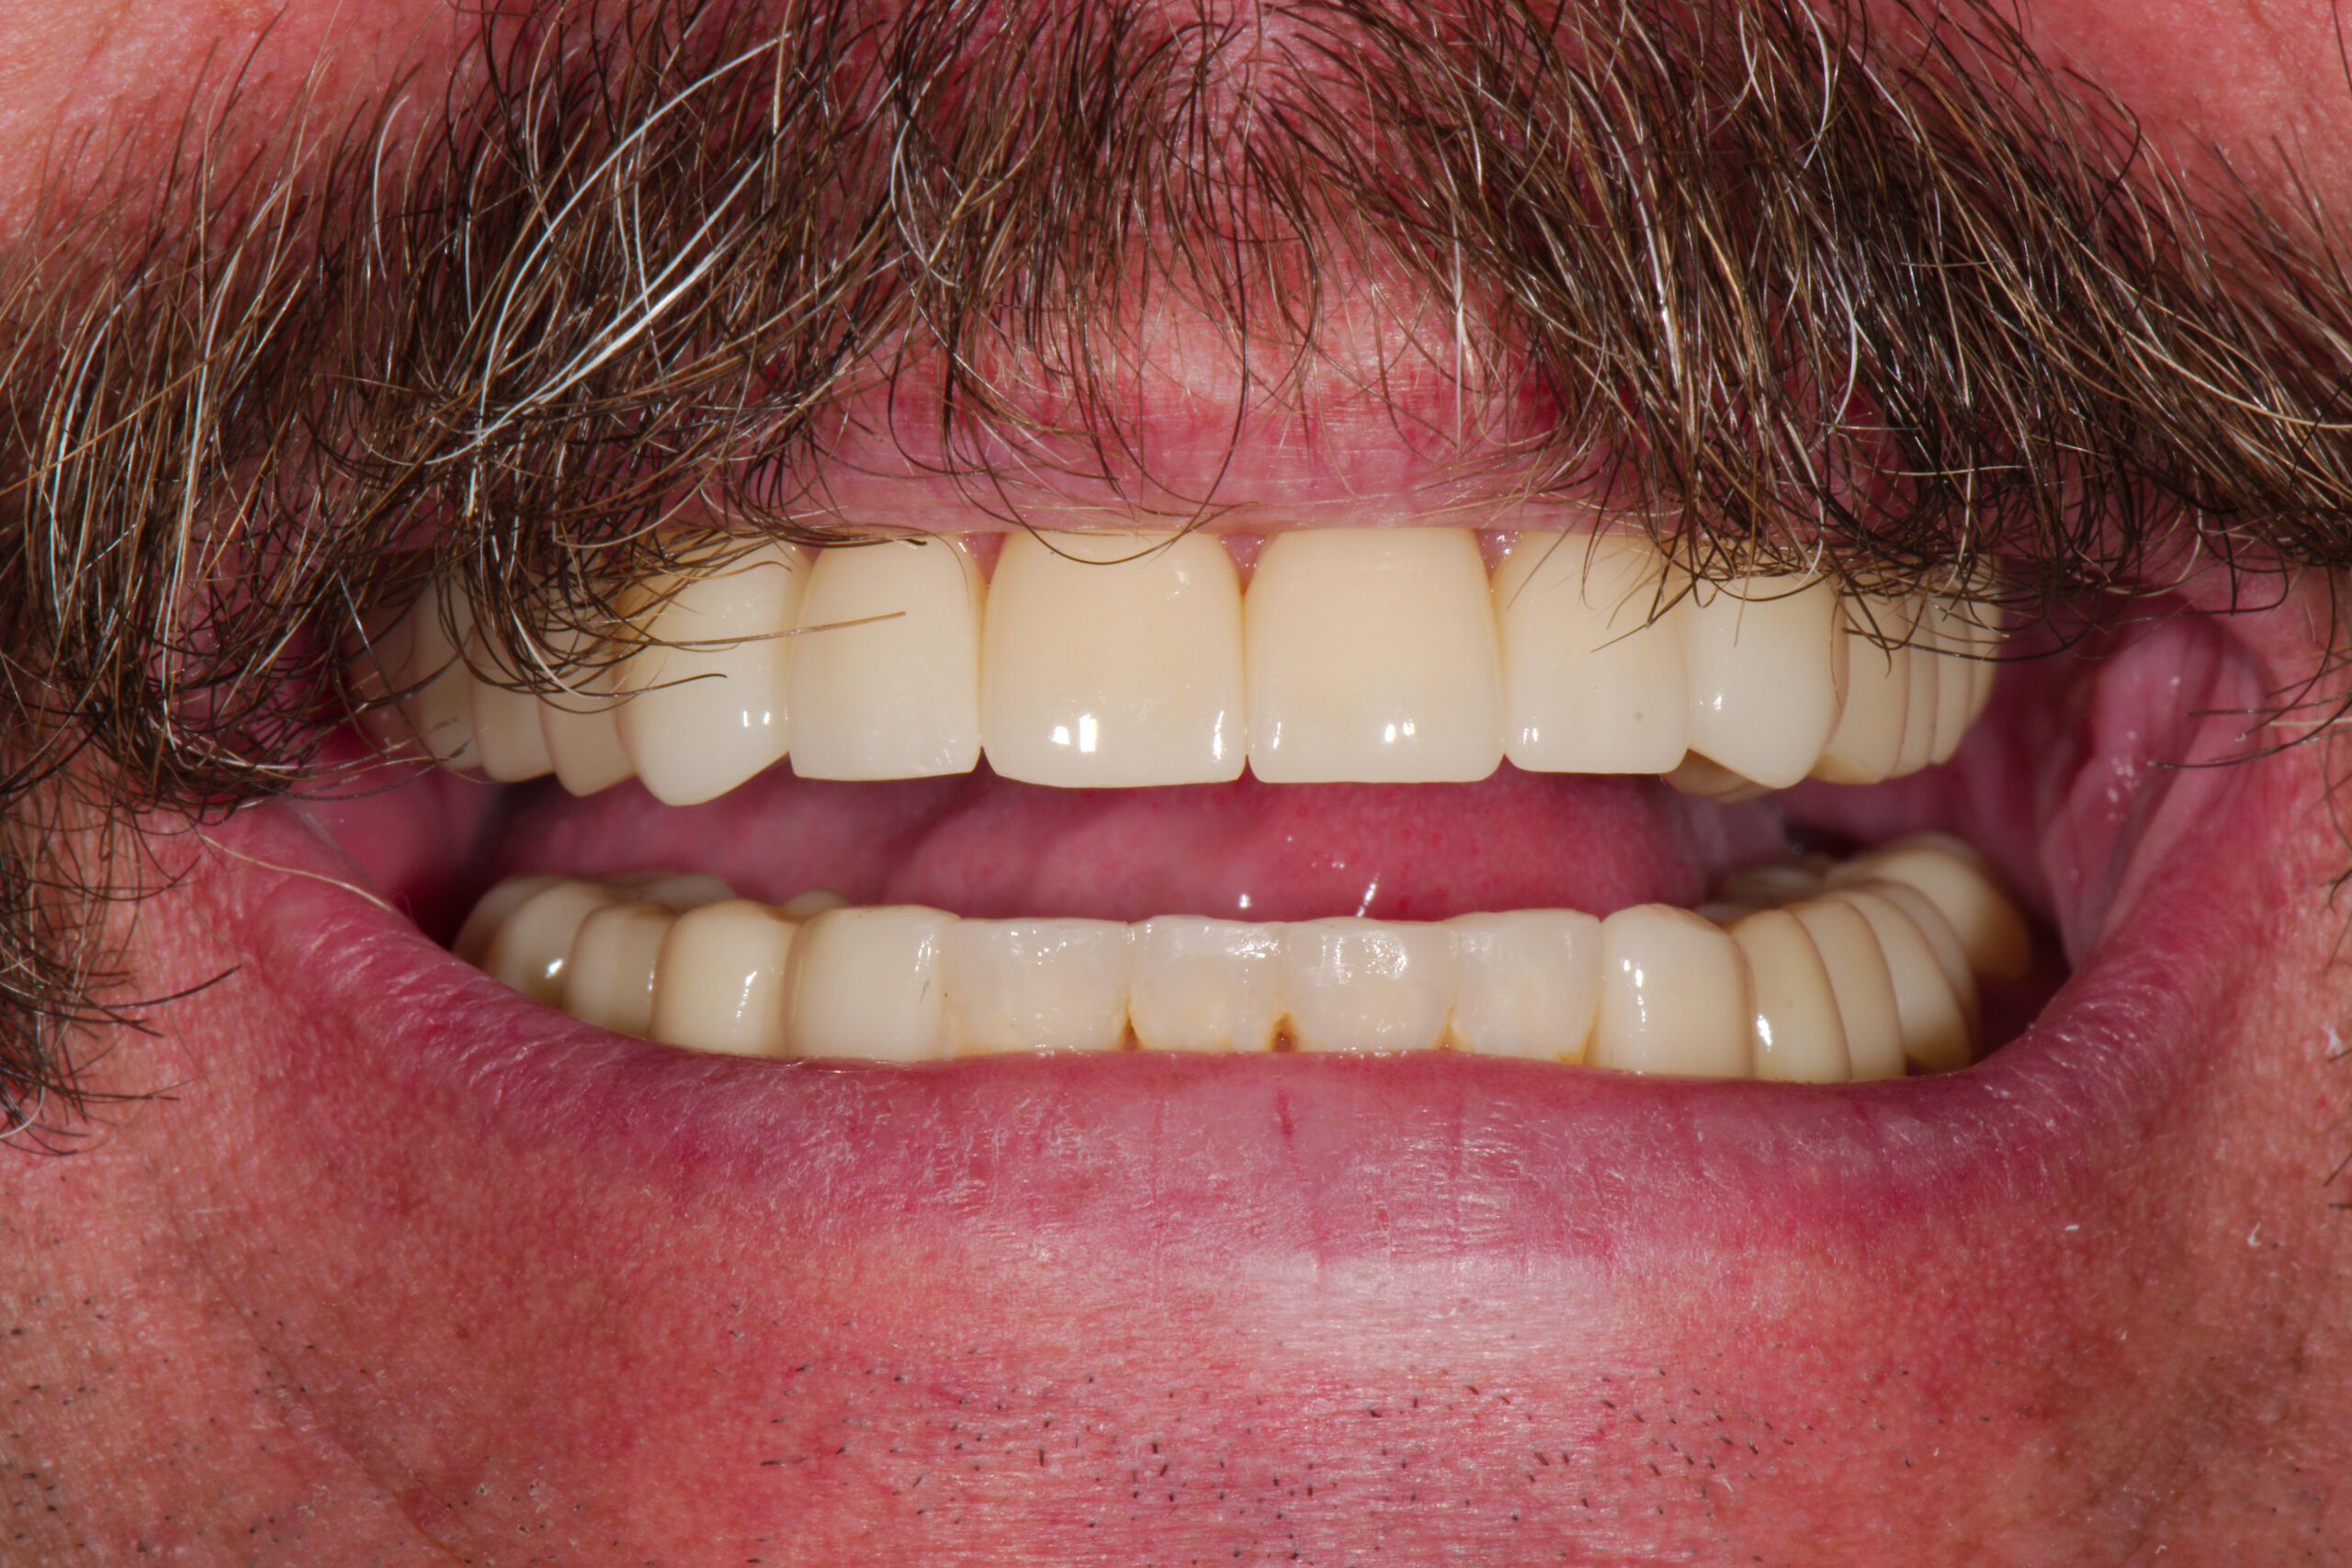 AFTER: Full Mouth Crowns to Fix Extreme Wear